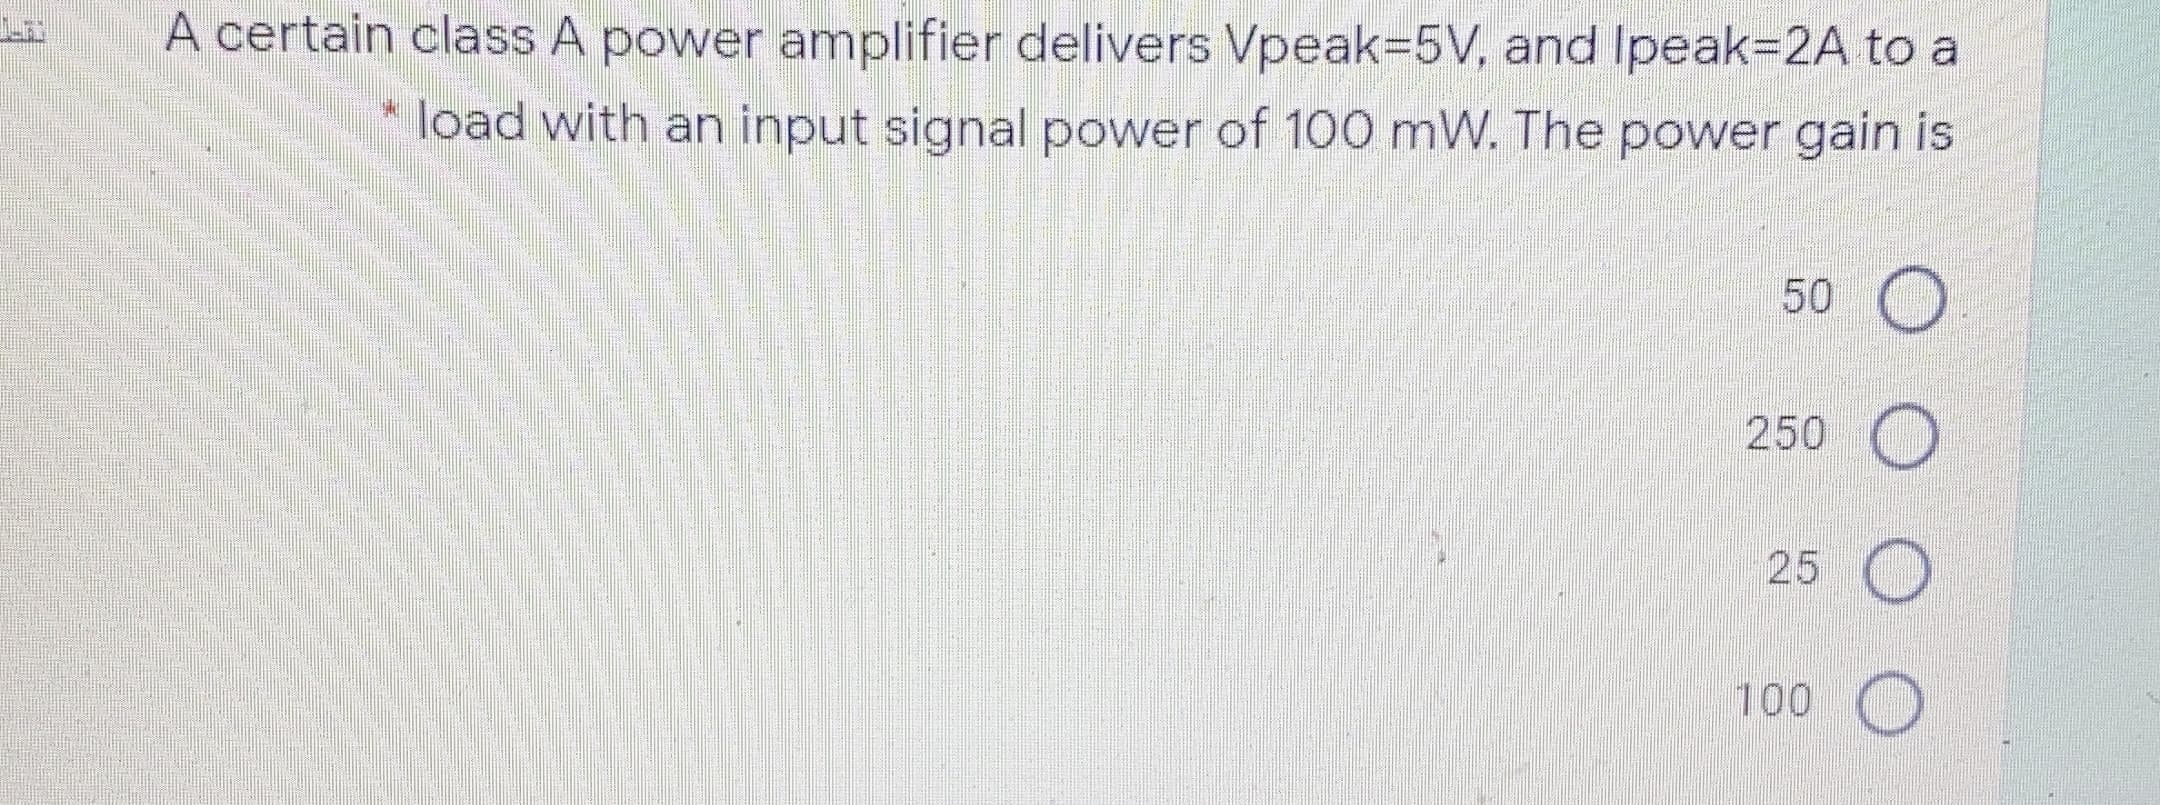 A certain class A power amplifier delivers Vpeak=5V, and Ipeak=2A to a
* load with an input signal power of 100 mW. The power gain is
50
250
25 O
100
